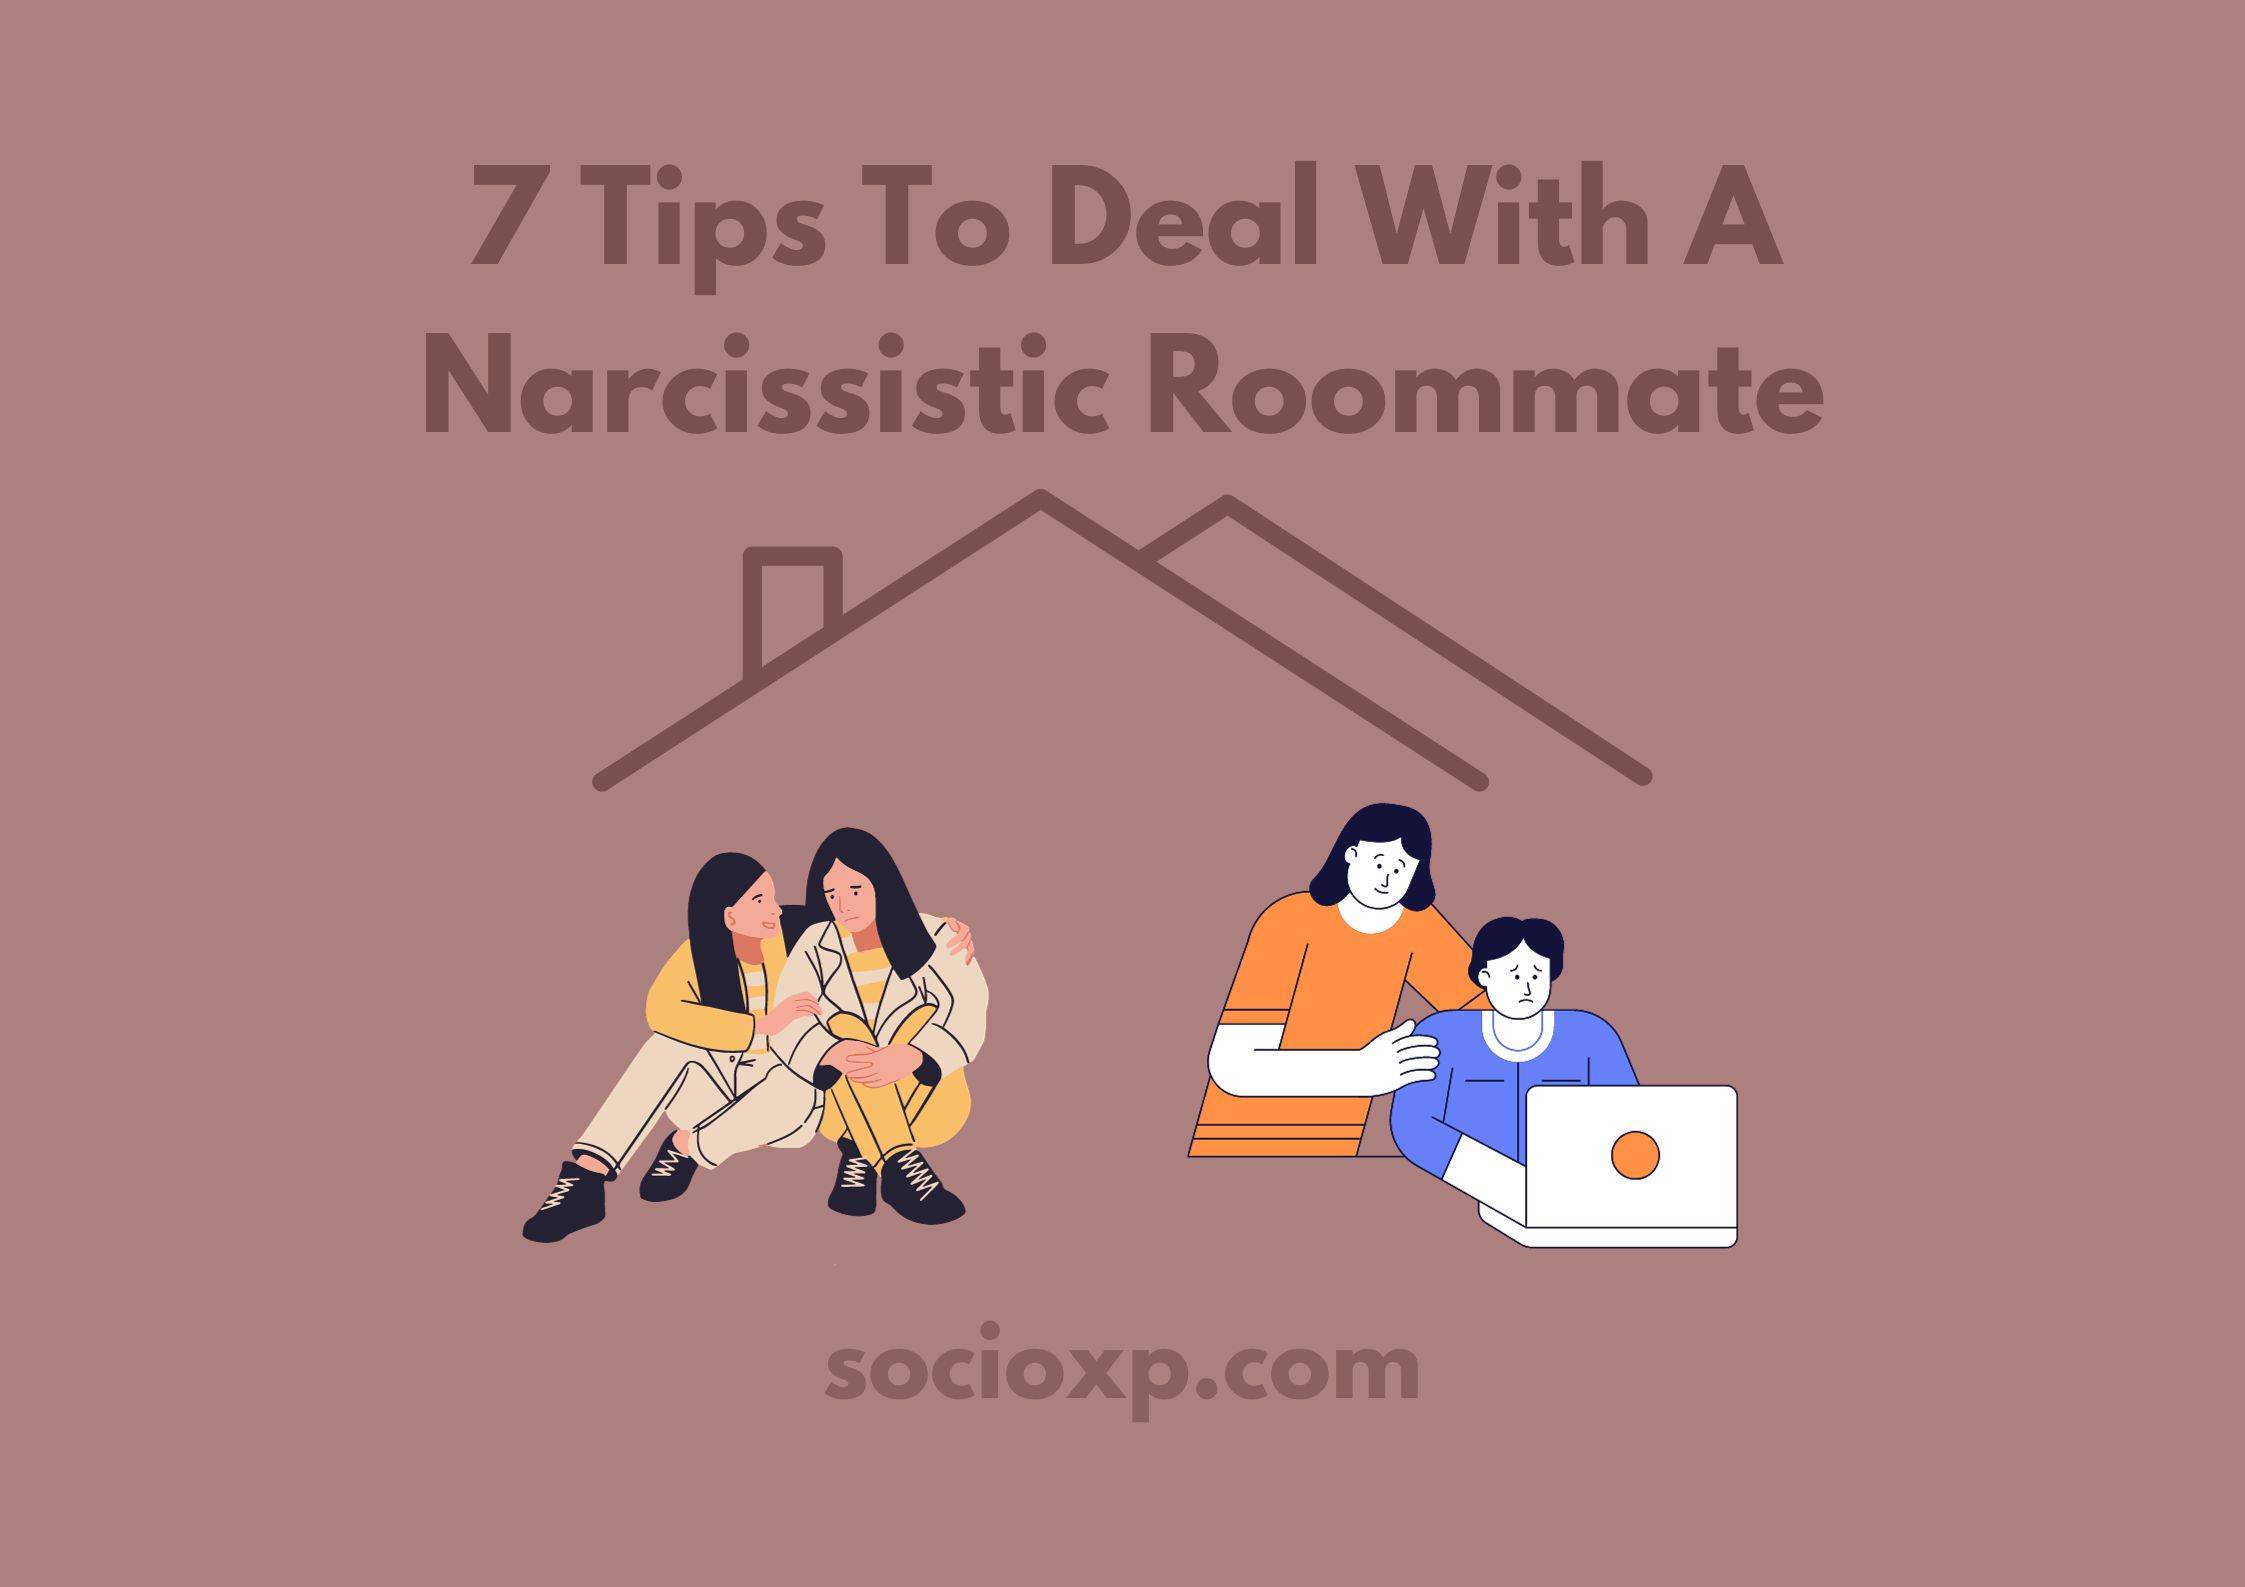 7 Tips To Deal With A Narcissistic Roommate